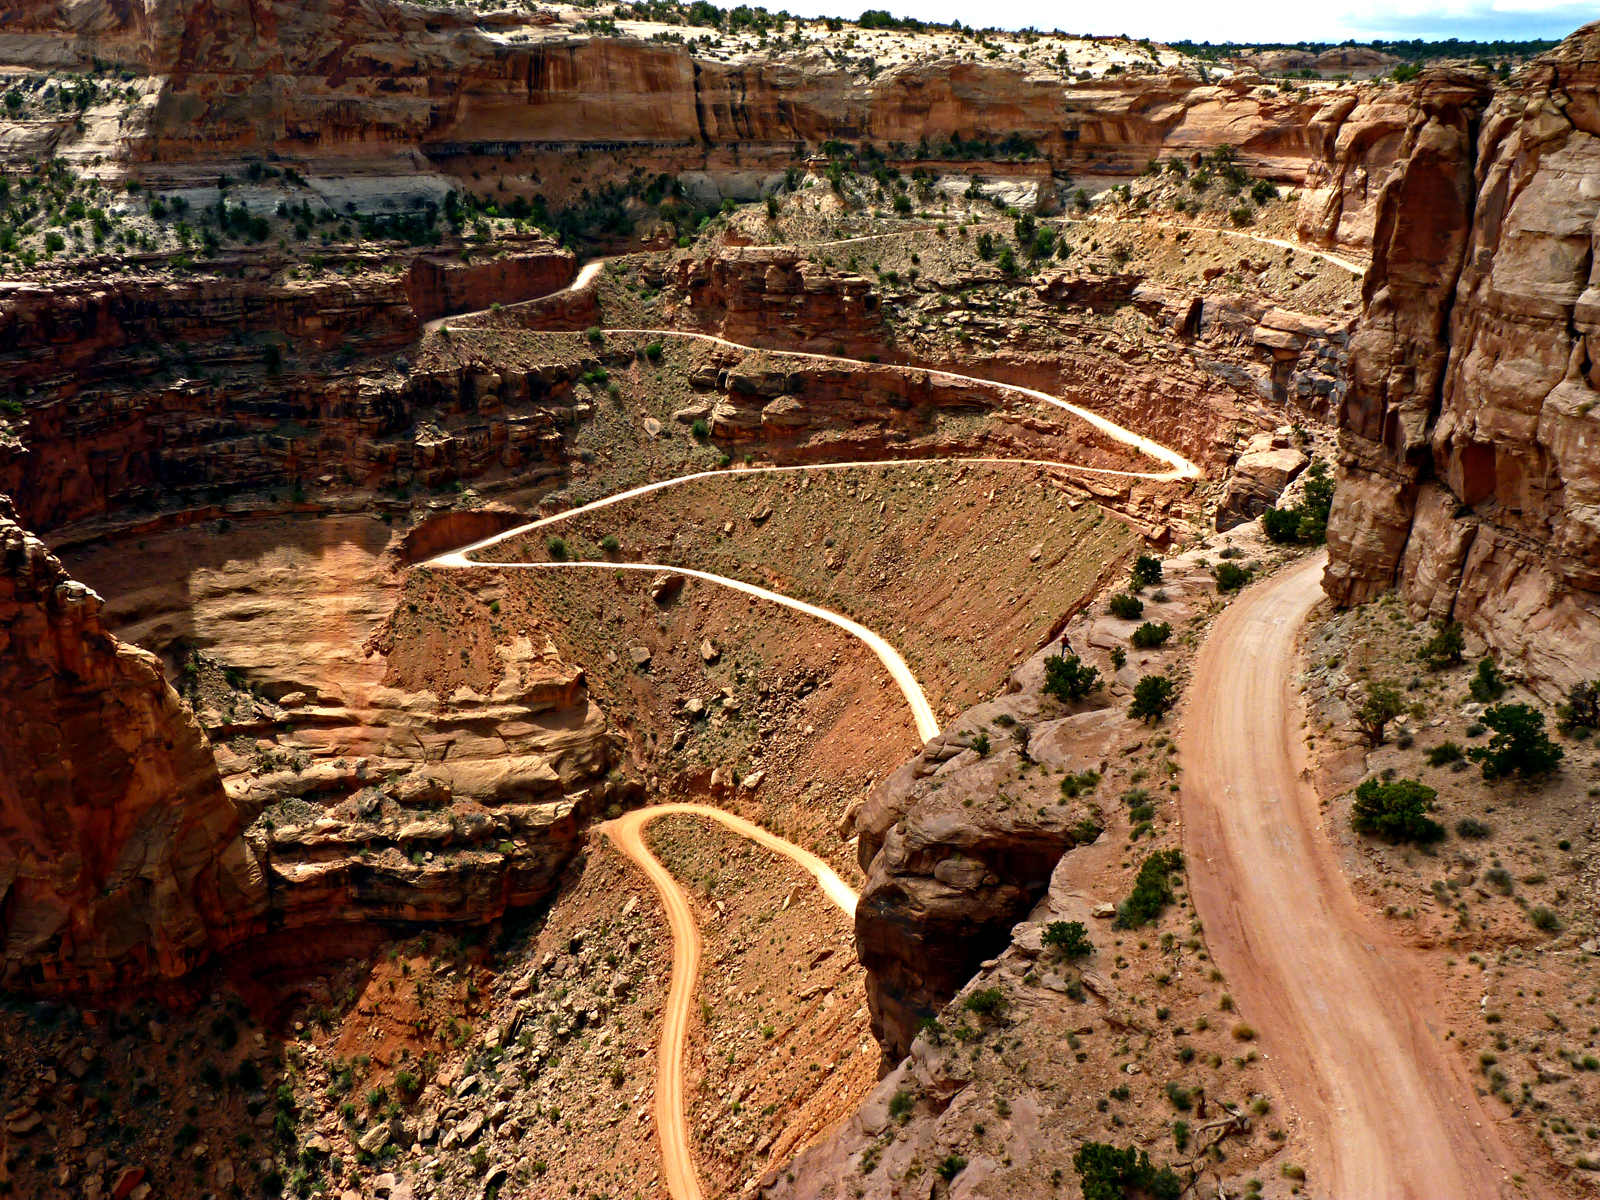 View of Shafer Trail as it descends the cliff face  -  Canyonlands National Park, Utah.  Photograph by Jean Nokleby. 